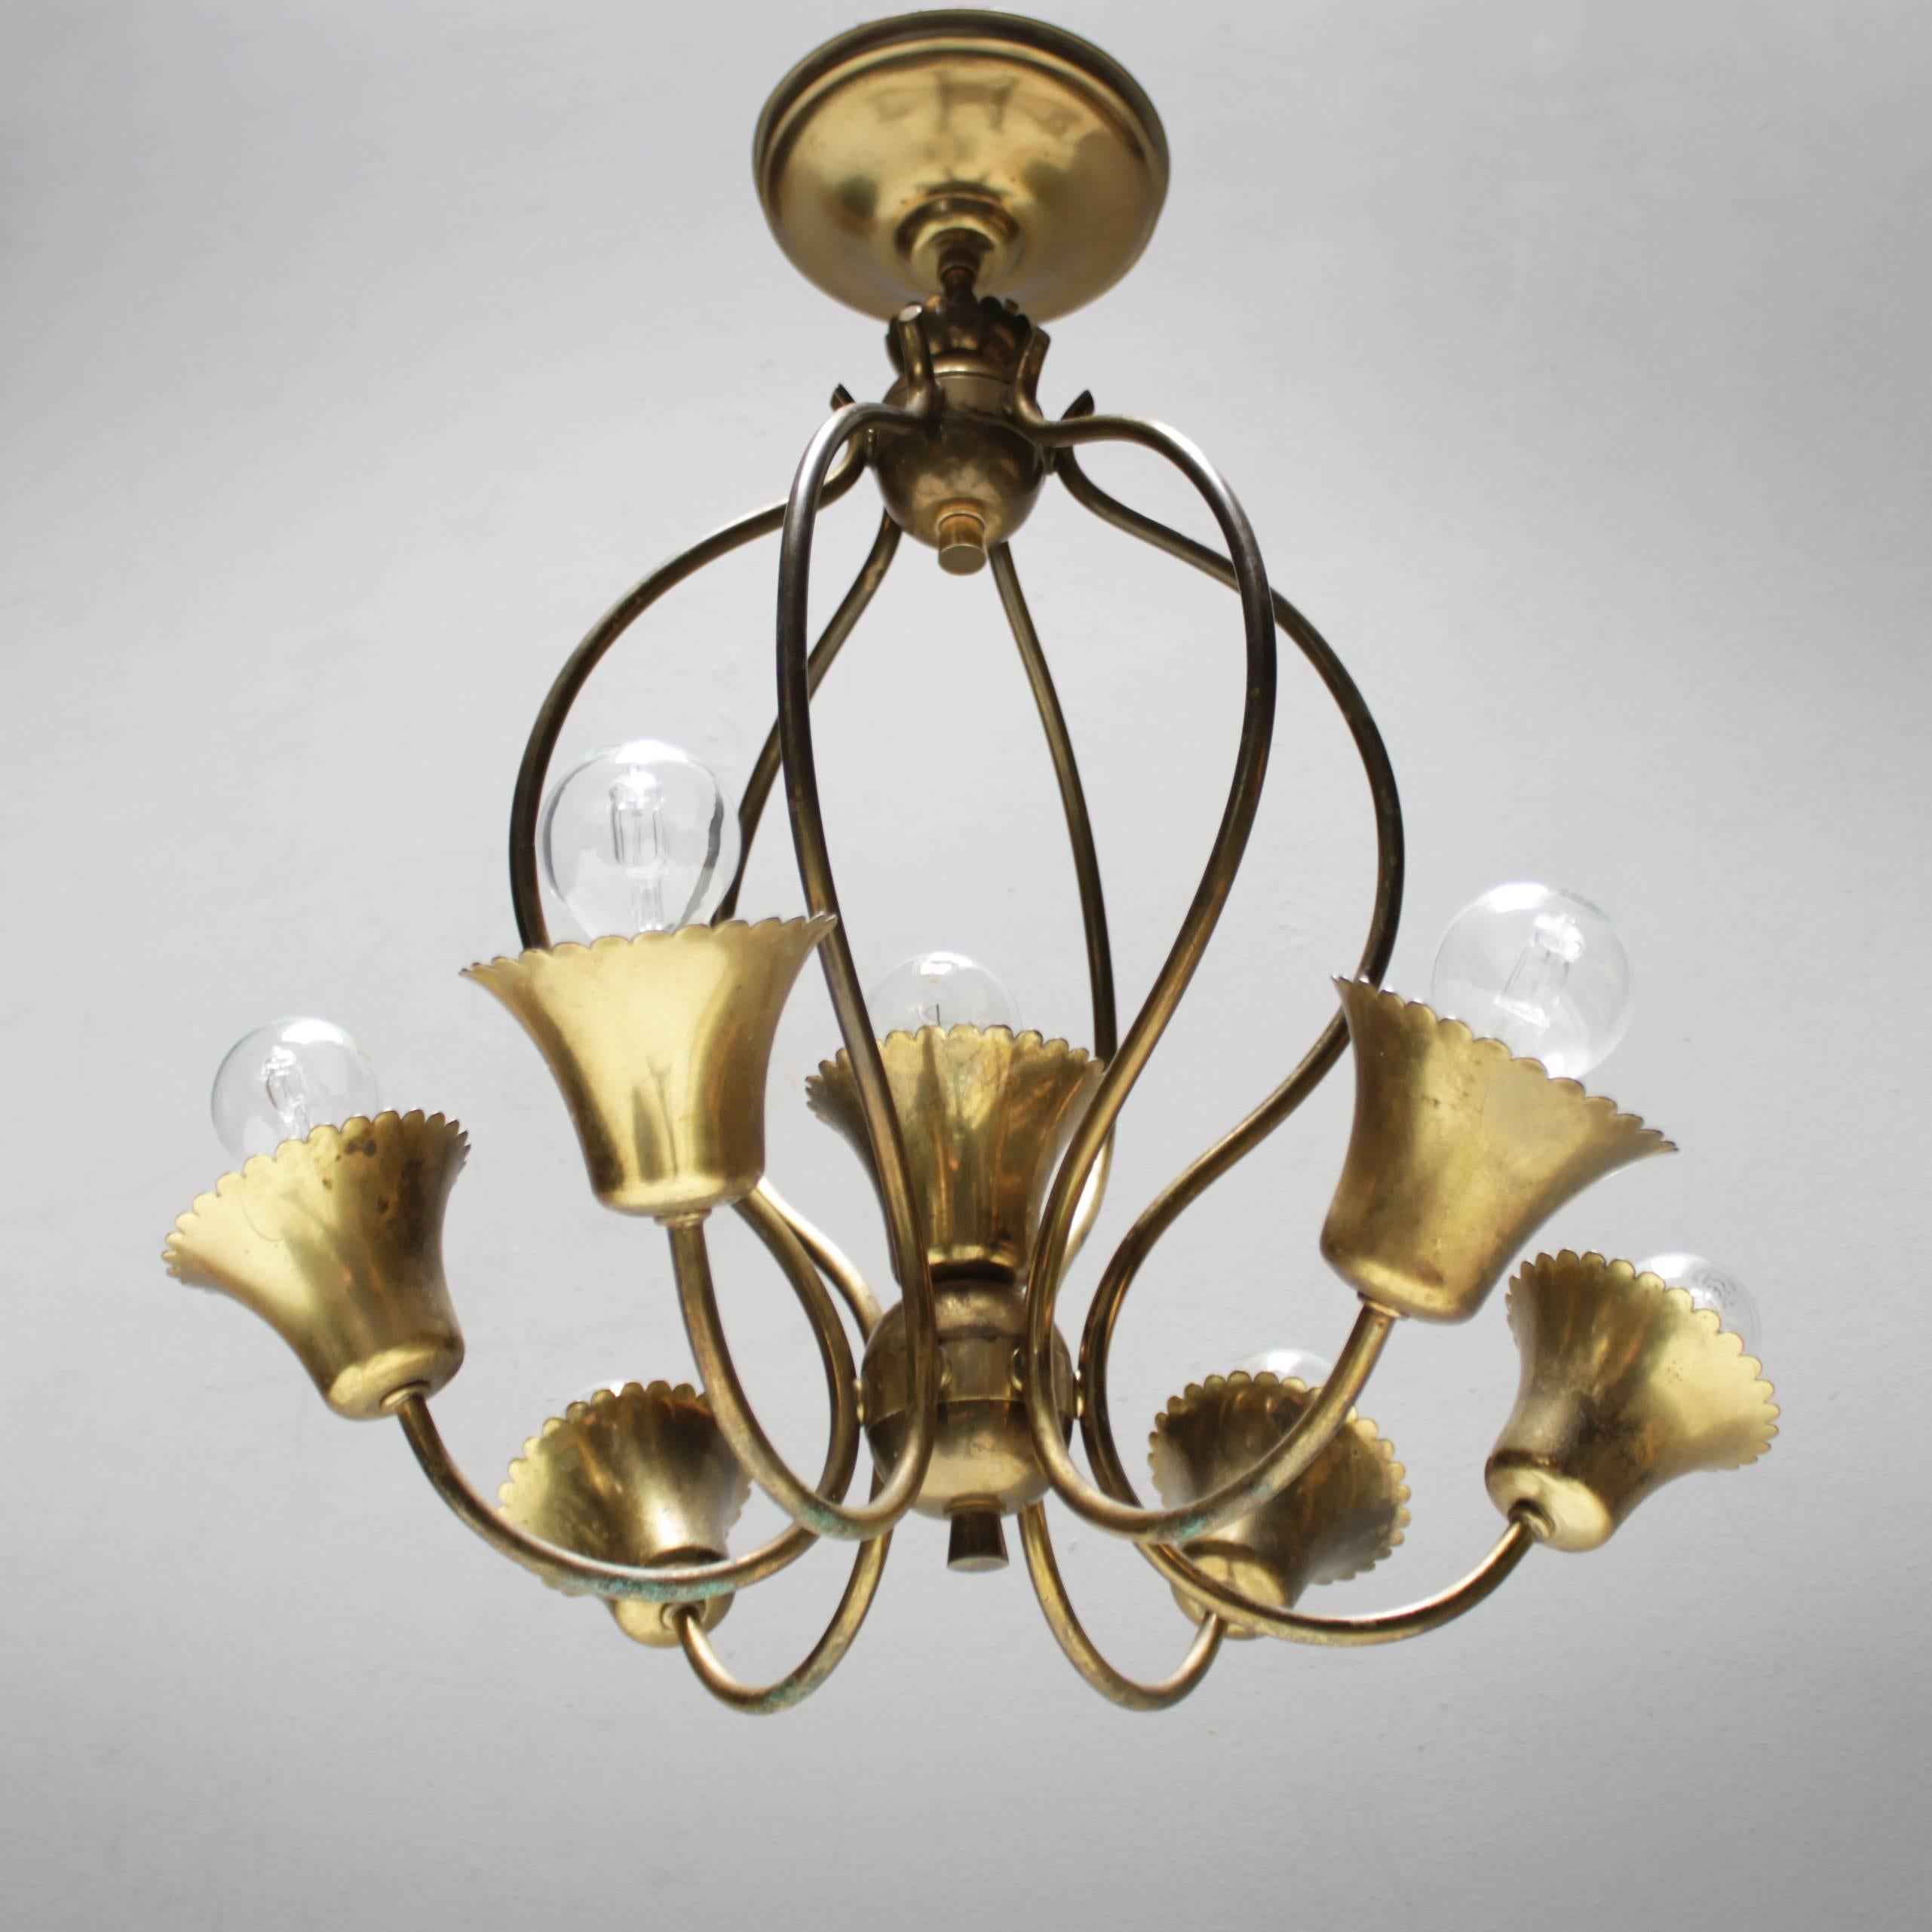 Nice mid size brass chandelier in the style of Gio Ponti, most likely produced by Arredoluce. The fixture holds 7 lamps: six small Edison screws and one with a regular Edison screw (mounted in the center).
The chandelier has recently been